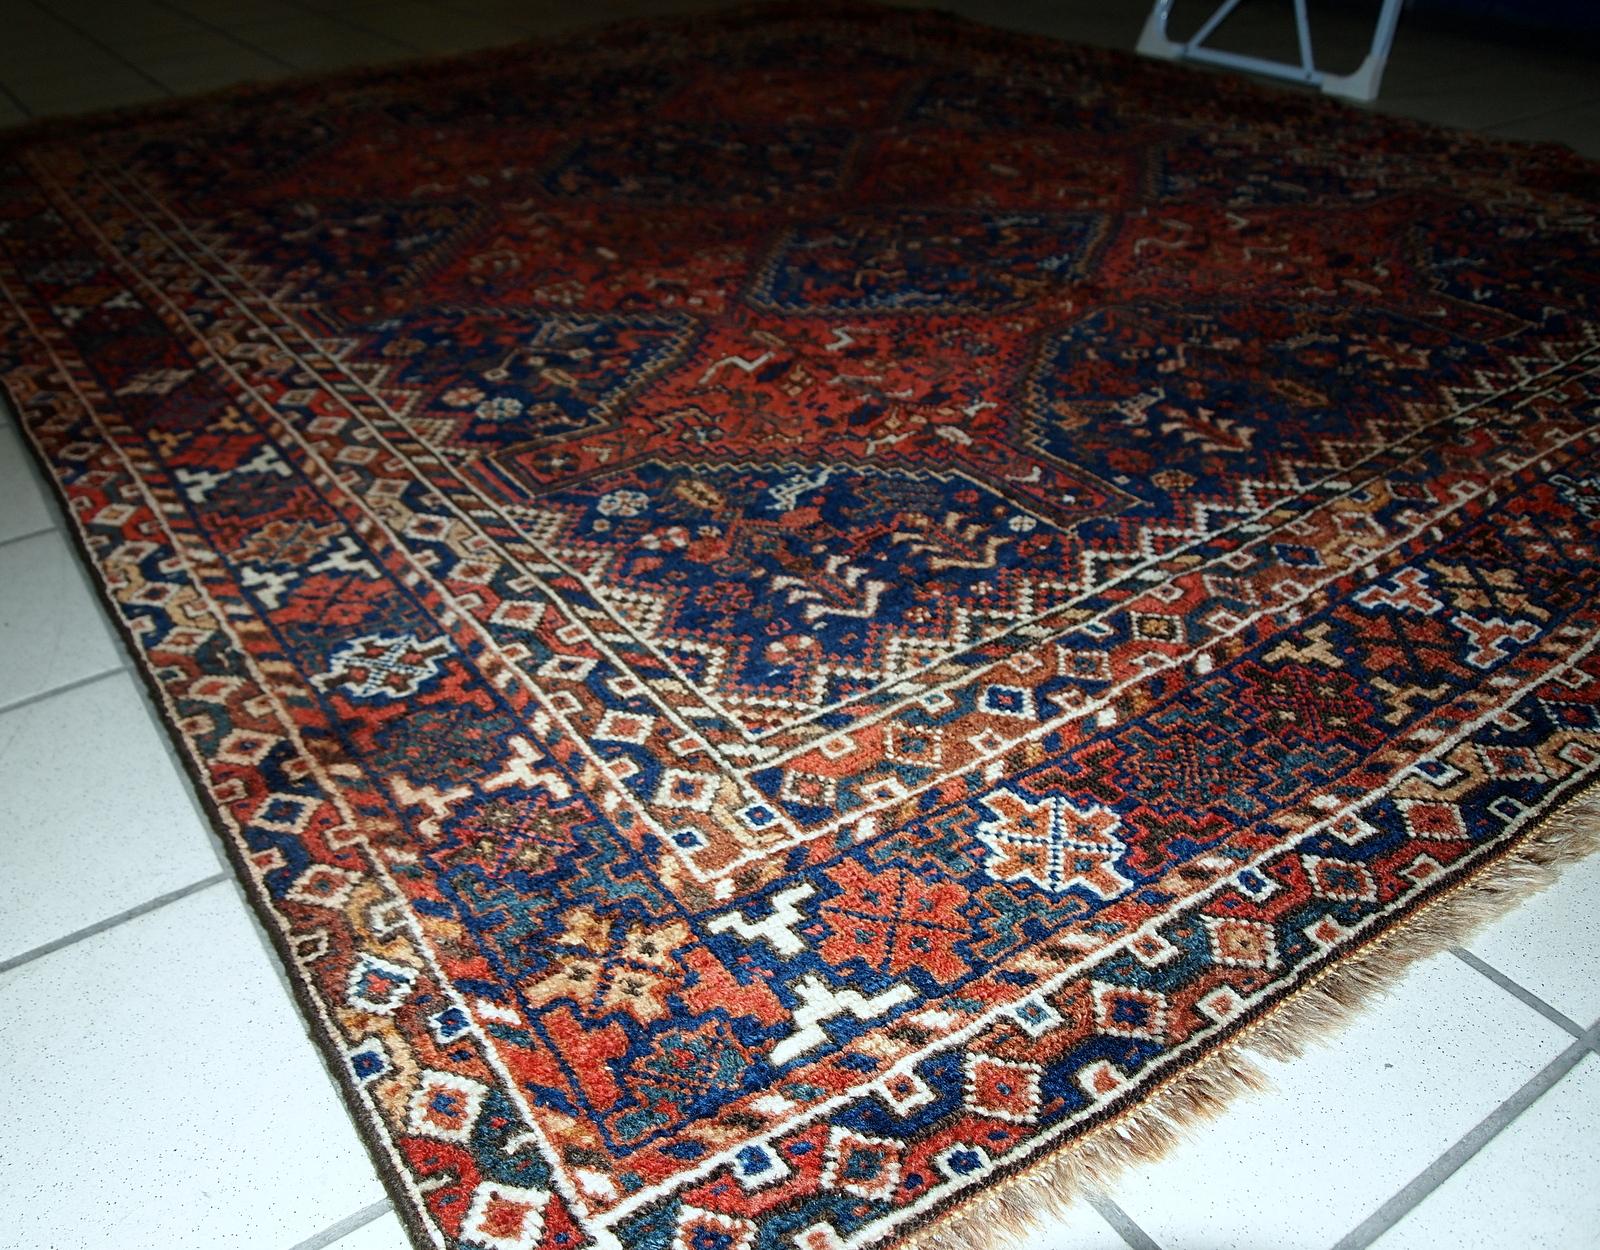 Handmade antique Khamseh rug from the beginning of 20th century with symmetric design and deep shades. The rug has some low pile.

-condition: some low pile,

-circa: 1900s,

-size: 6' x 6.4' (156cm x 194cm),

-material: wool,

-country of origin: